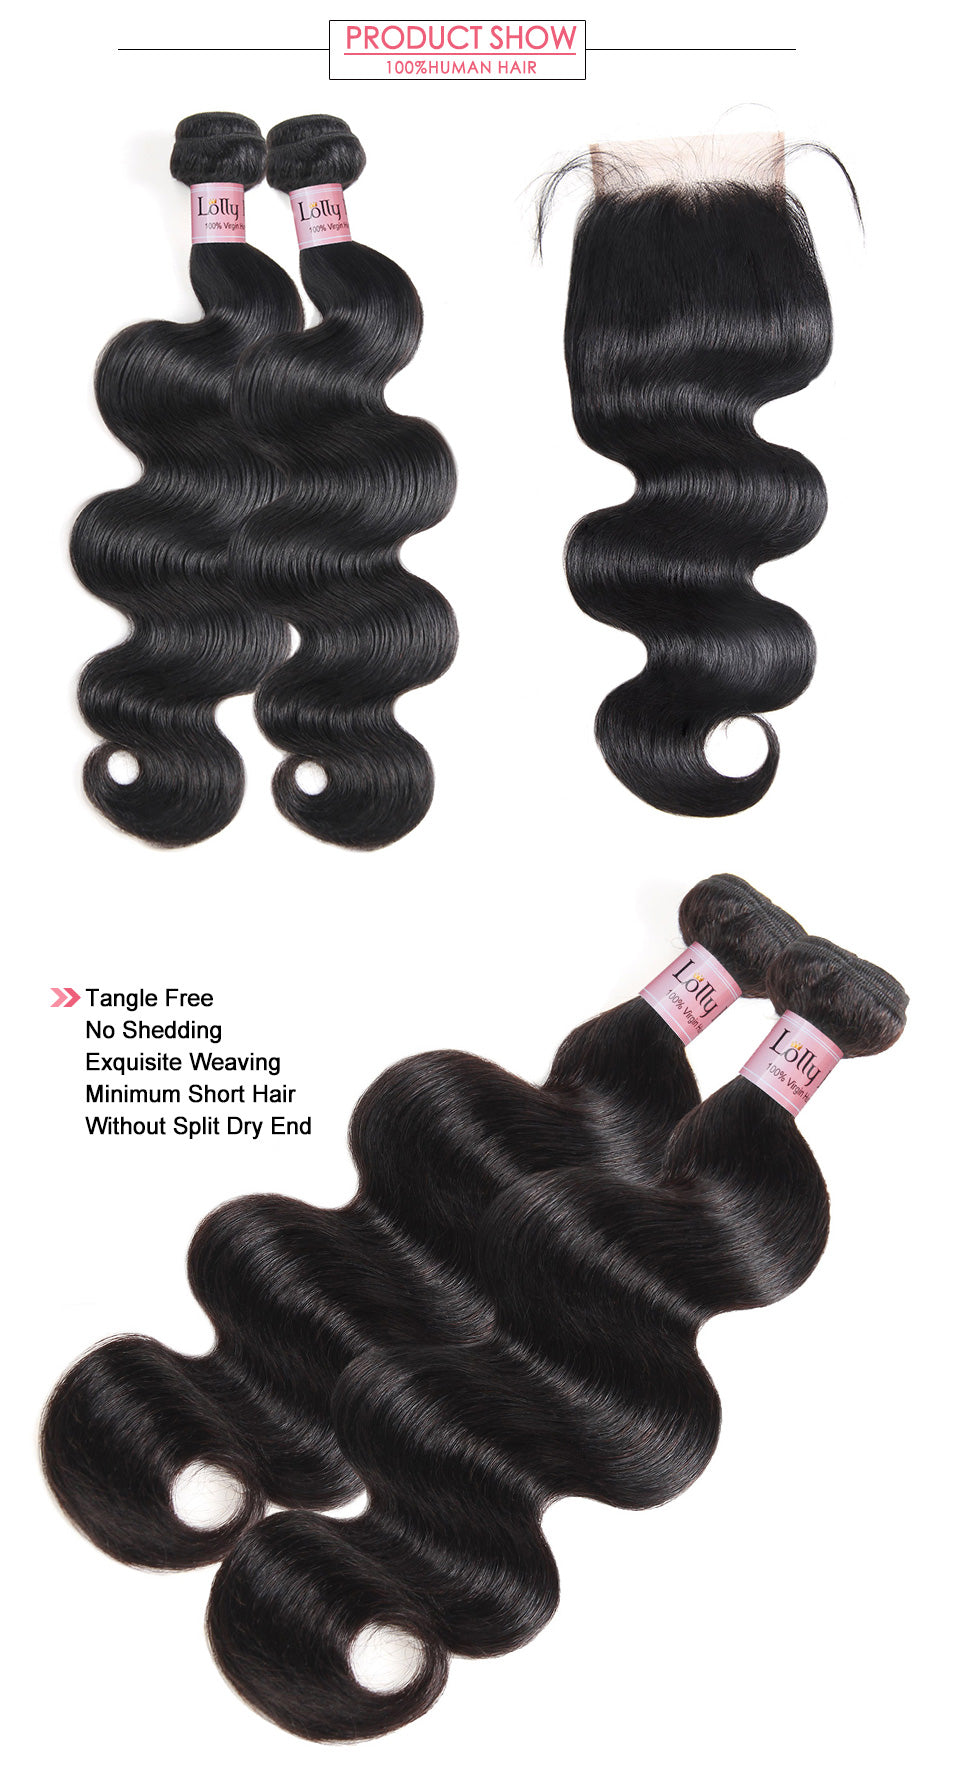 Lolly Hair 9A Malaysian Body Wave Hair 2 Bundles with 4x4 Lace Closure